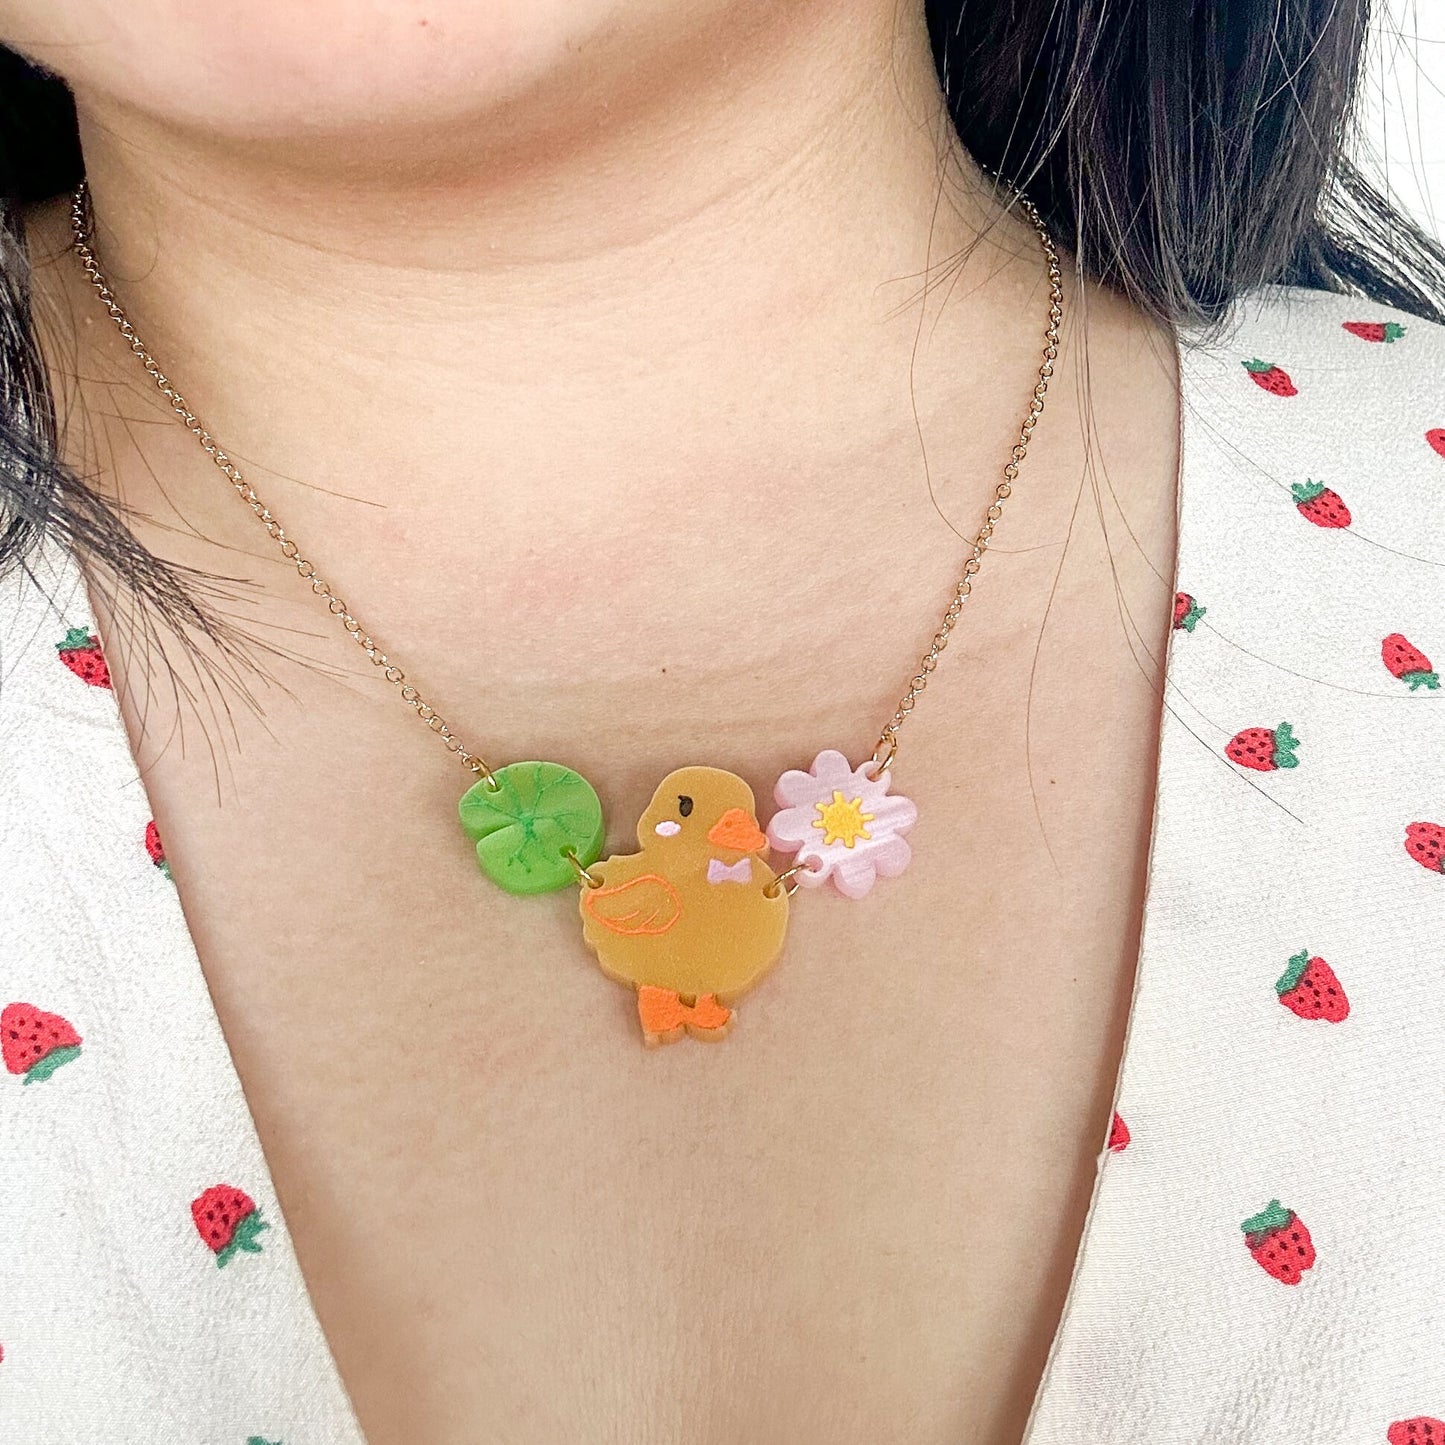 Yellow Duck Necklace//Cat Necklace//Statement Necklace//Acrylic Necklace//Cute duck Necklace//Animal//Cute Necklace//Gift for Her